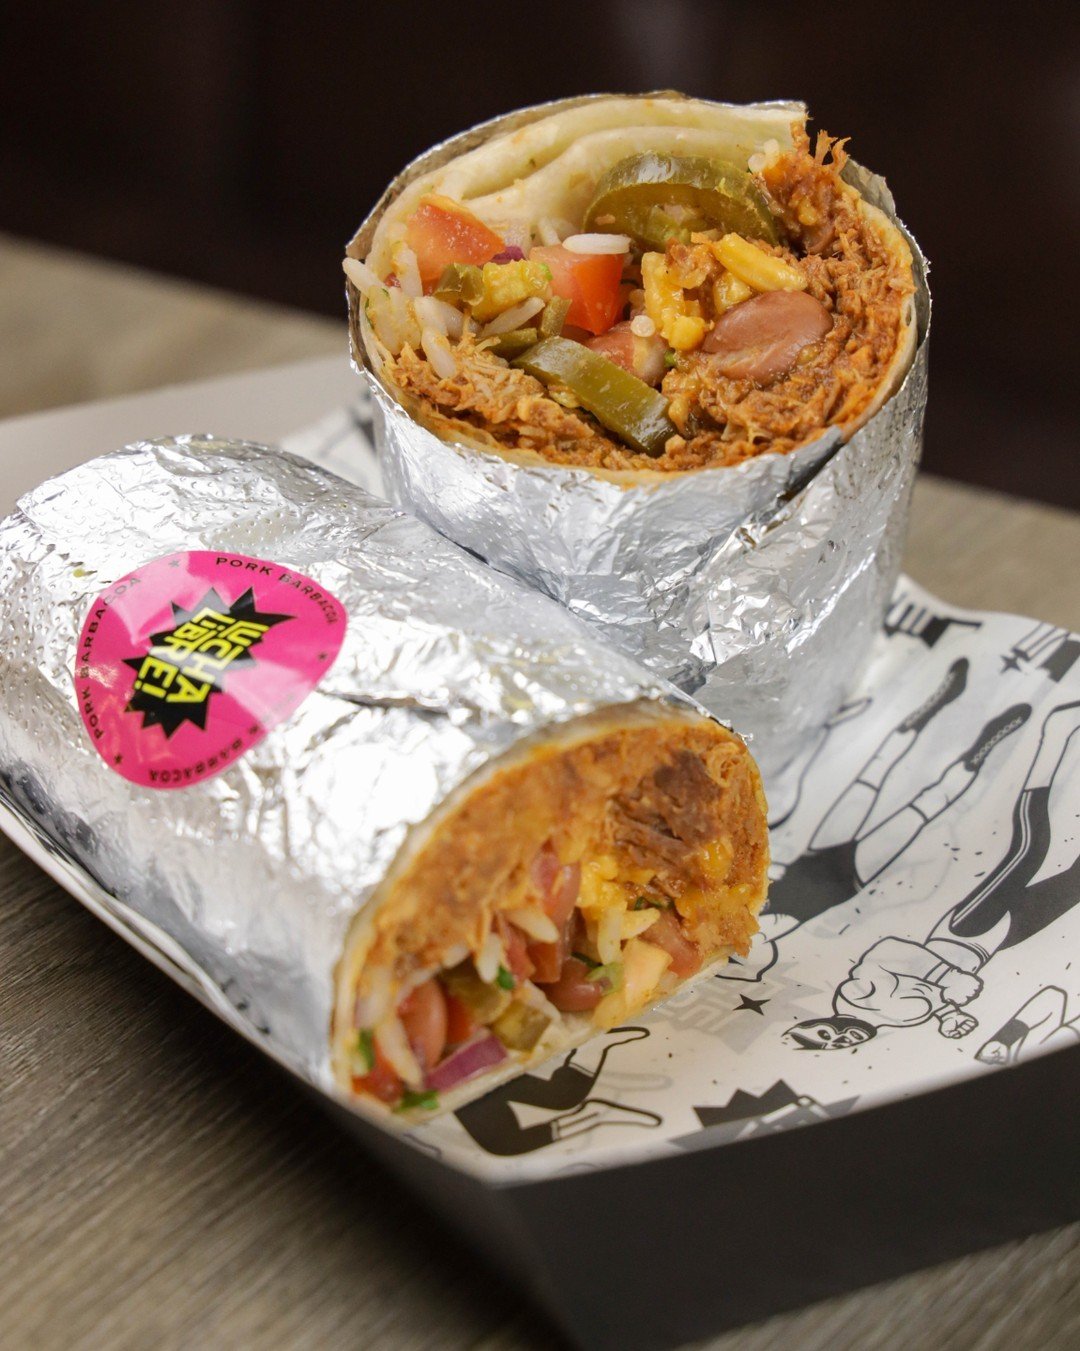 Get stuck into the best burrito in town at Lucha Libre! Find us inside Eat 17 on the high street.

#fullyloaded #nachos #jalapeno #cheesesauce #guacamole #sourcream #eat17bishopsstortford #tacos #mecicanstreetfood #mexicanbishopsstortford